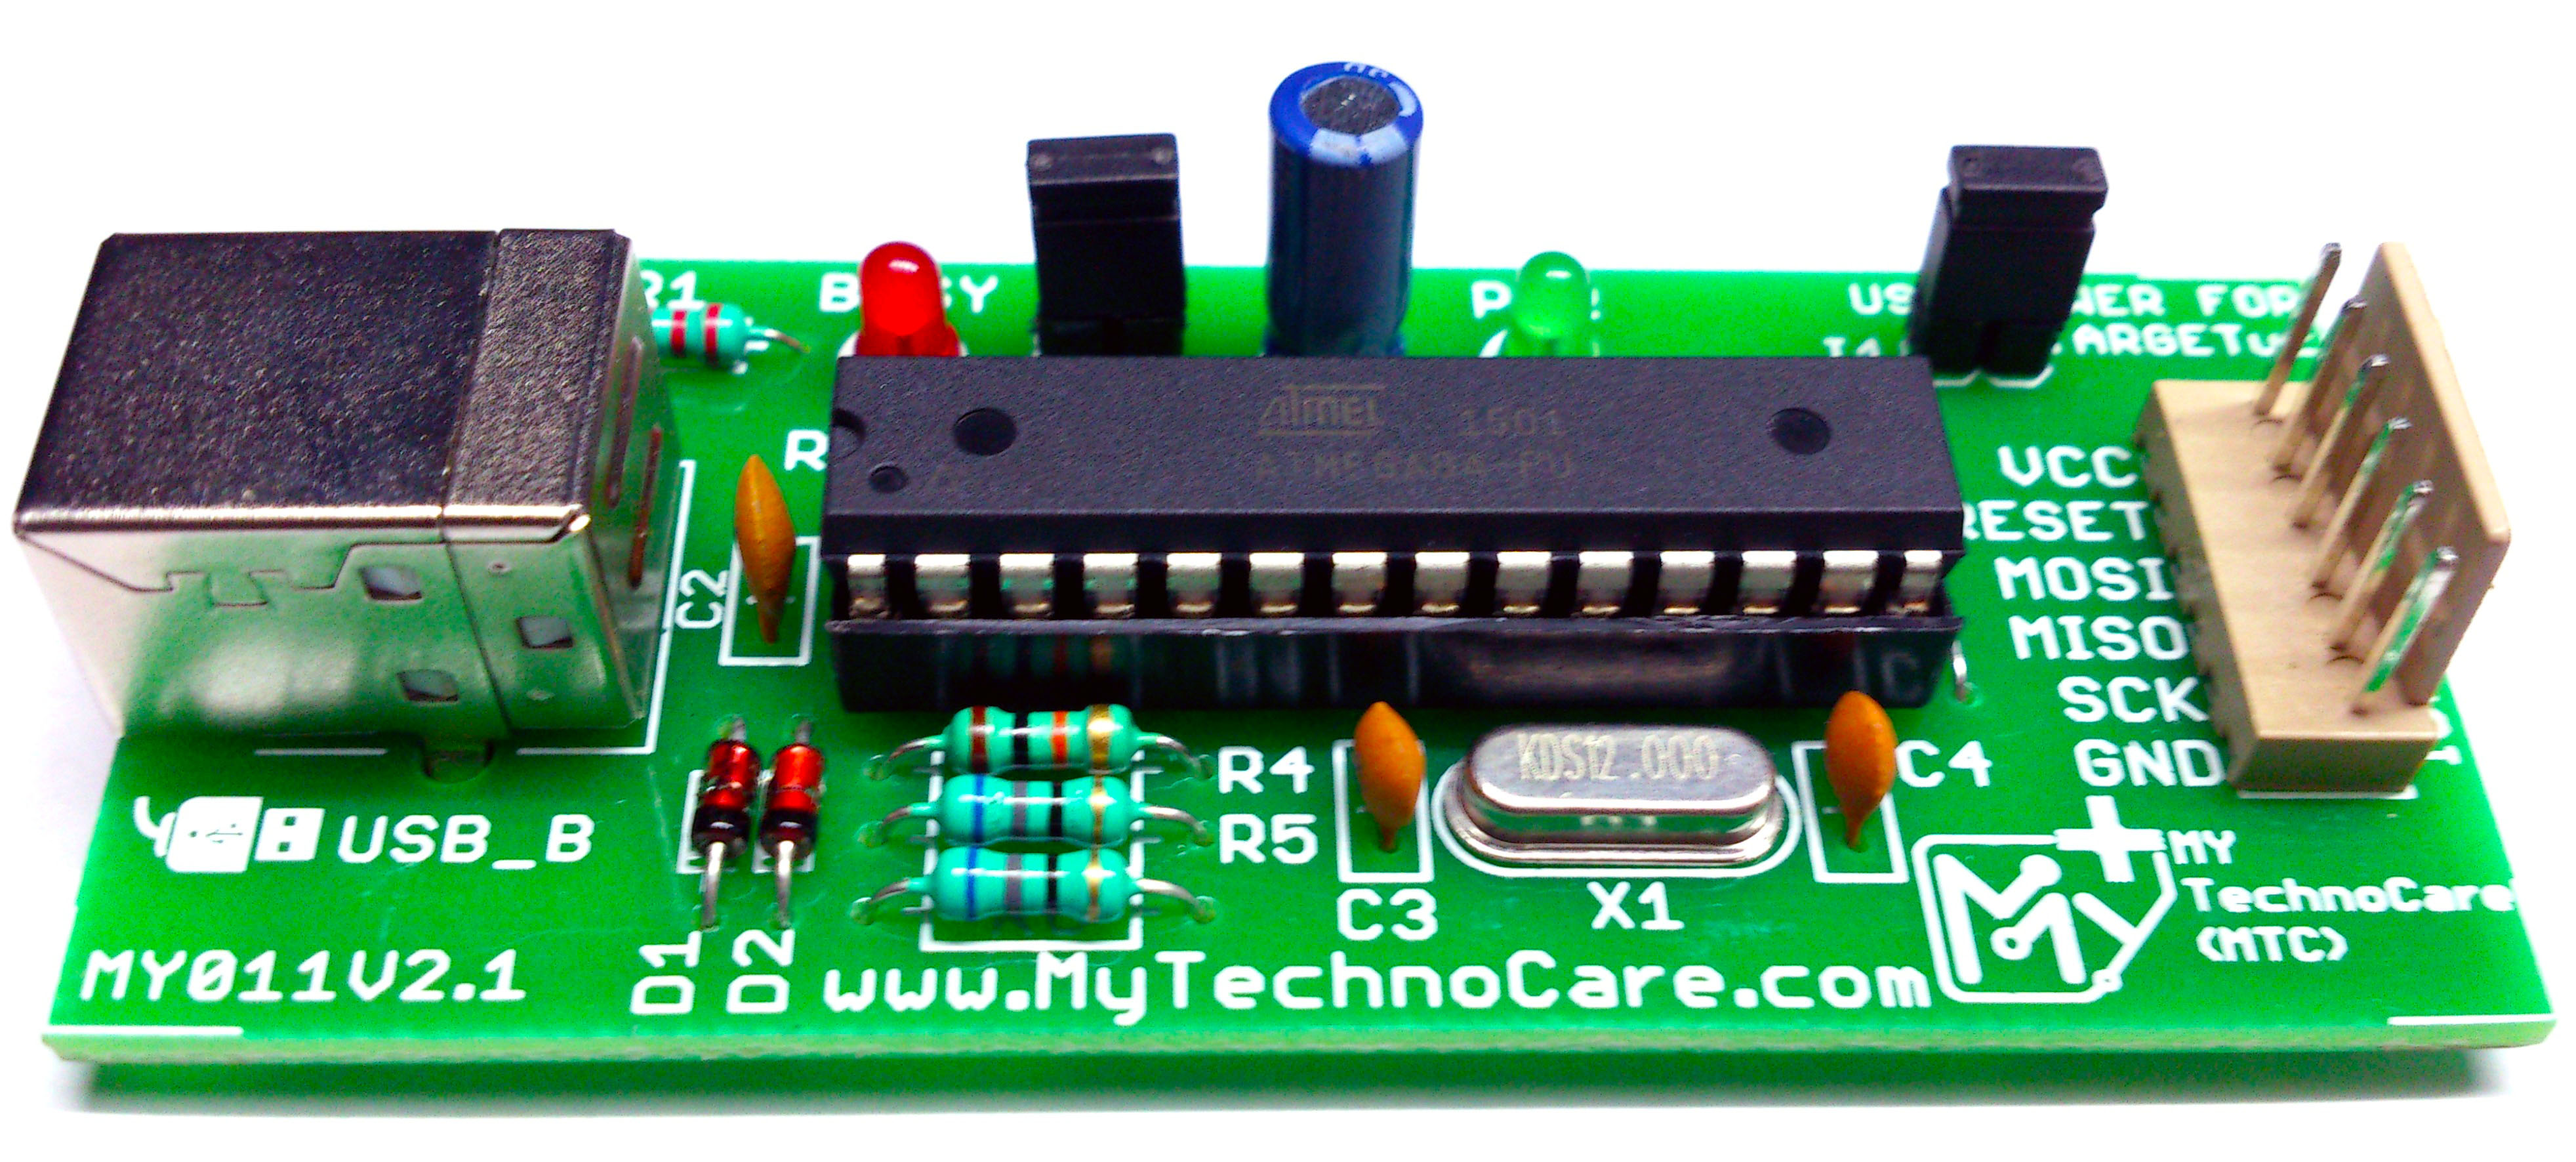 Buy 16x2 Lcd Display With 8051 Microcontroller Interfacing Board With Zif Socket Usb Isp 1216